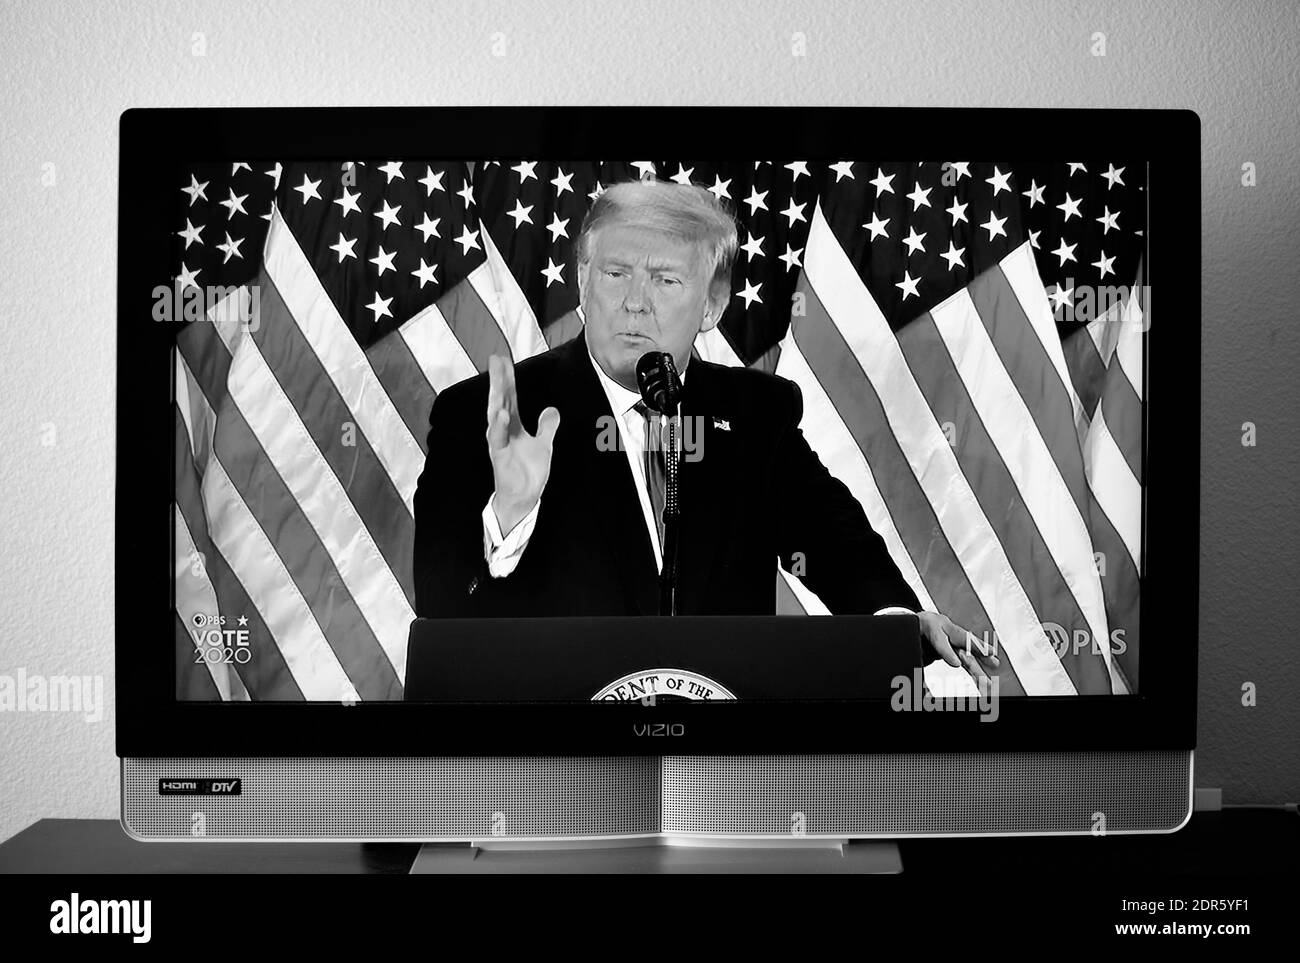 A PBS TV screenshot of U.S. President Donald Trump speaking to supporters and refuting he lost the 2020 election to Joe Biden. Stock Photo